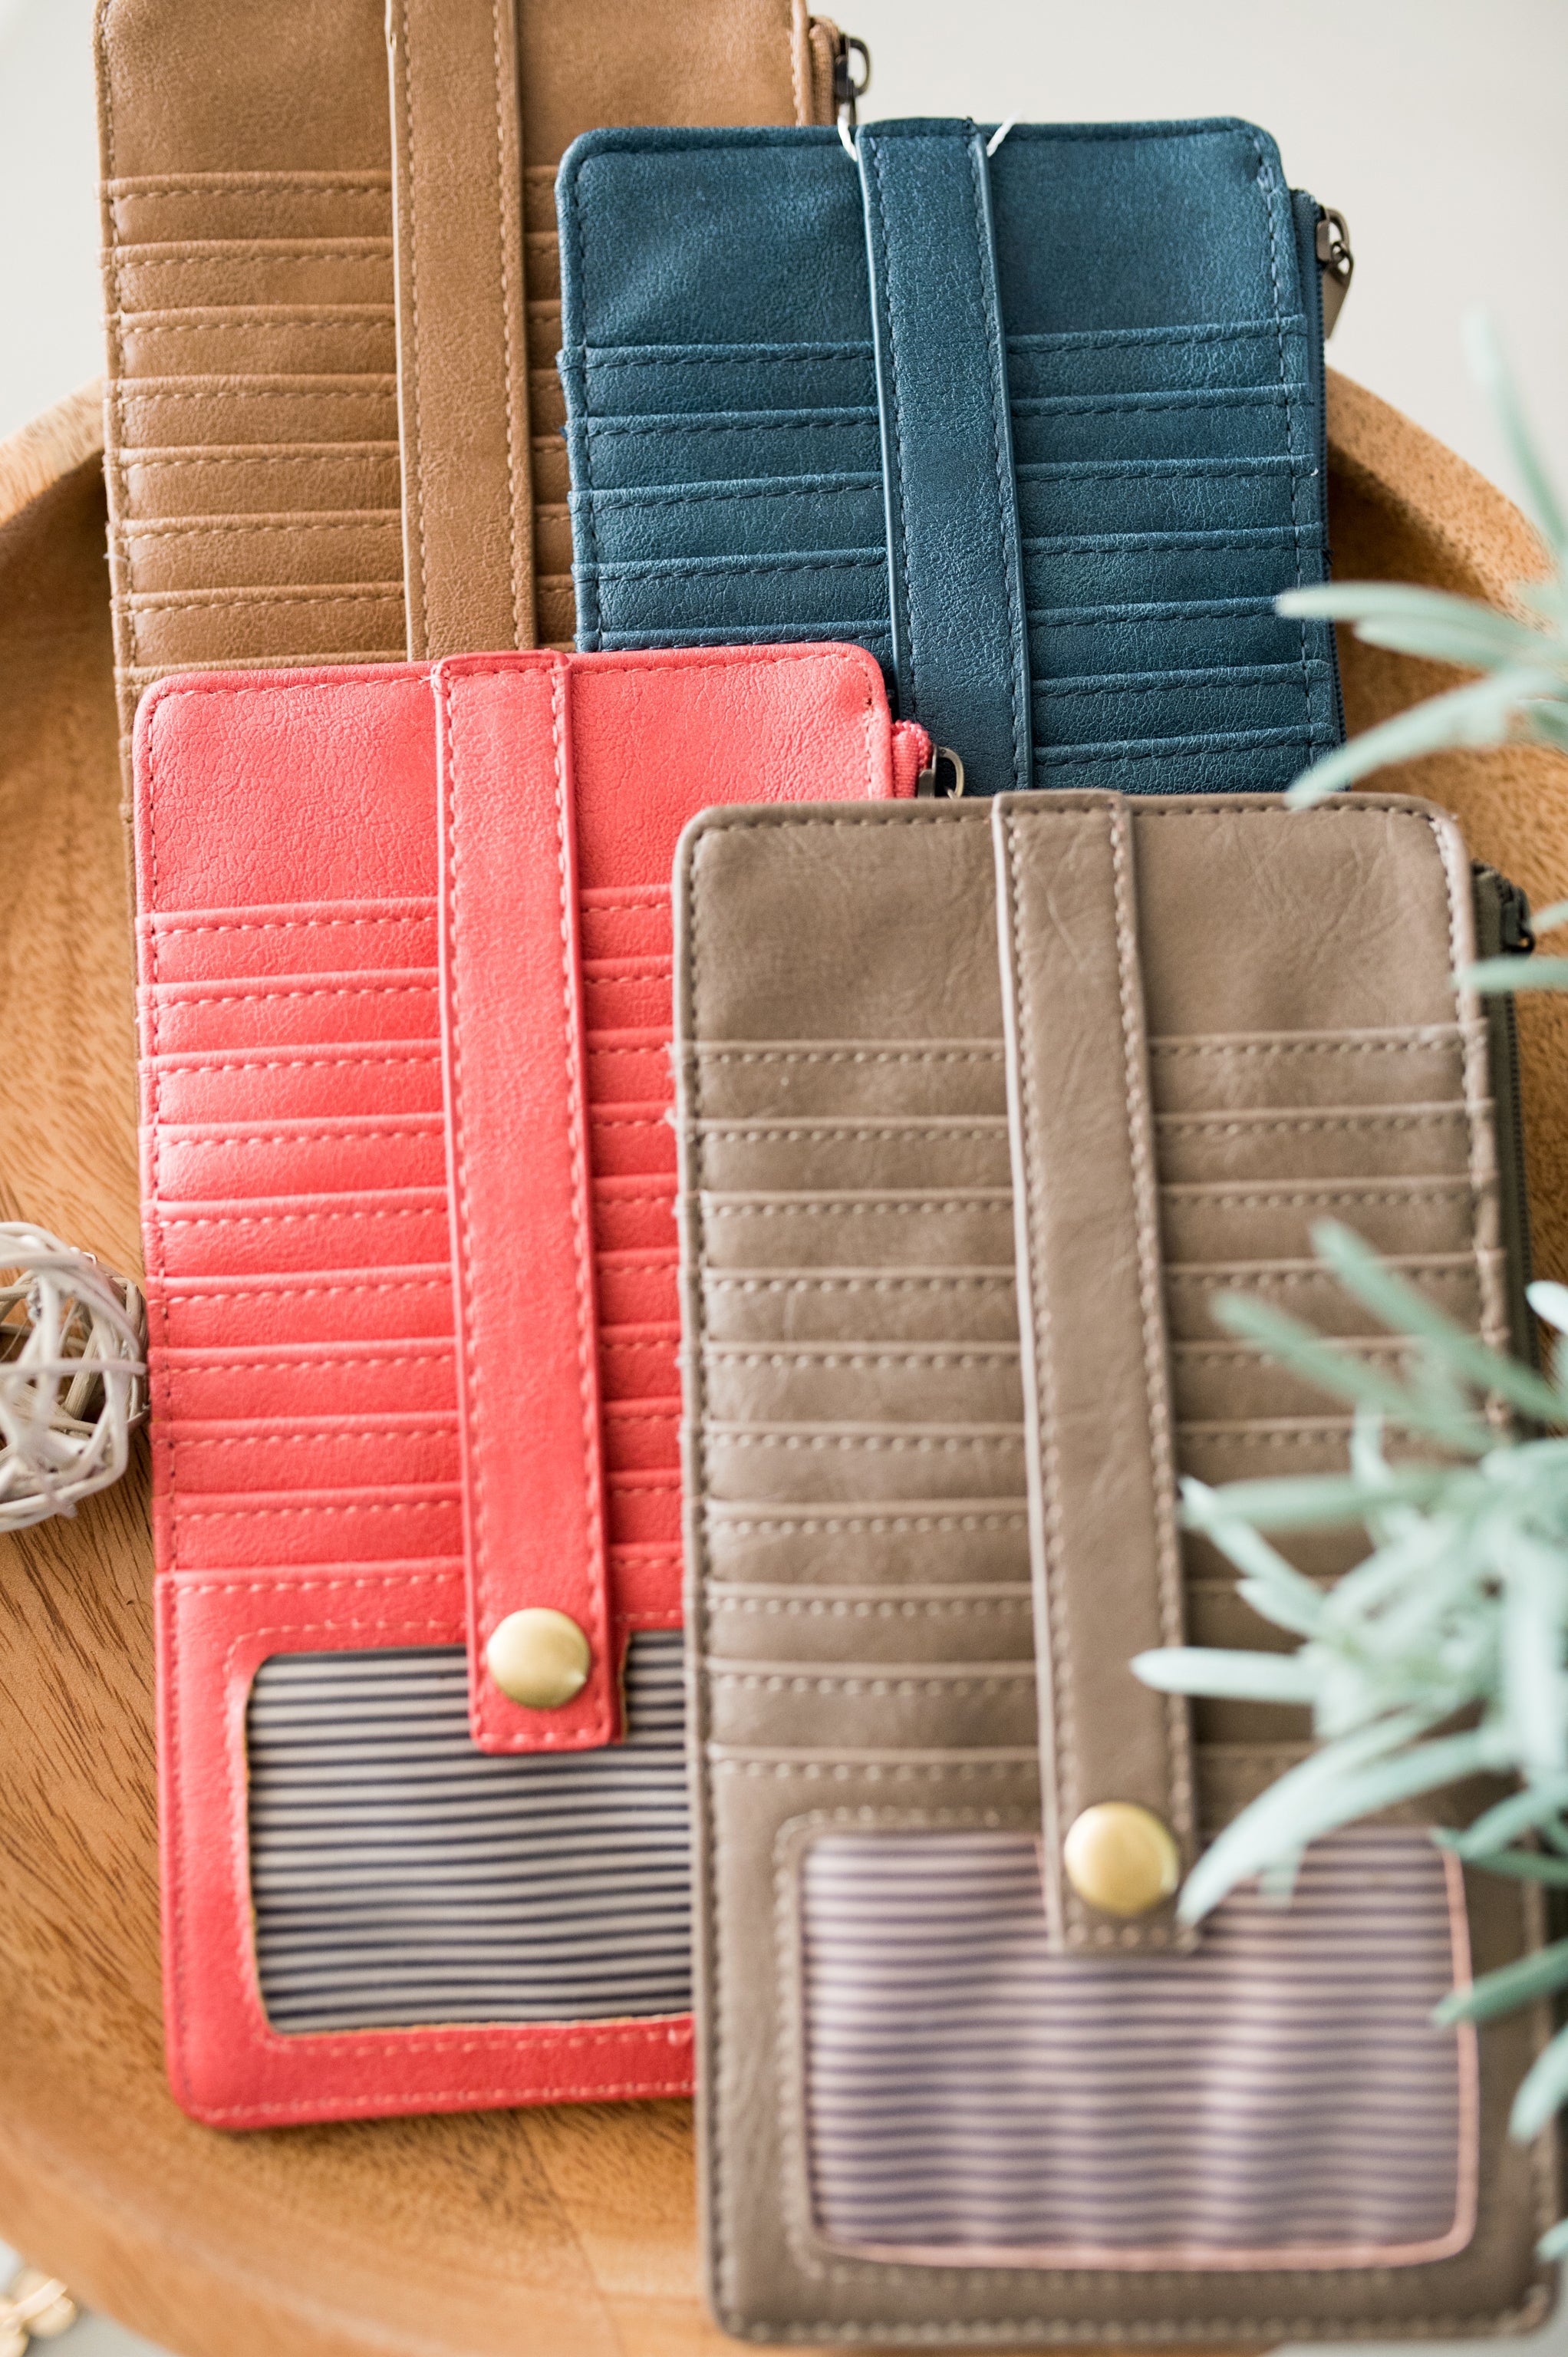 Joy Susan Travel Wallets In Assorted Autumn Colors